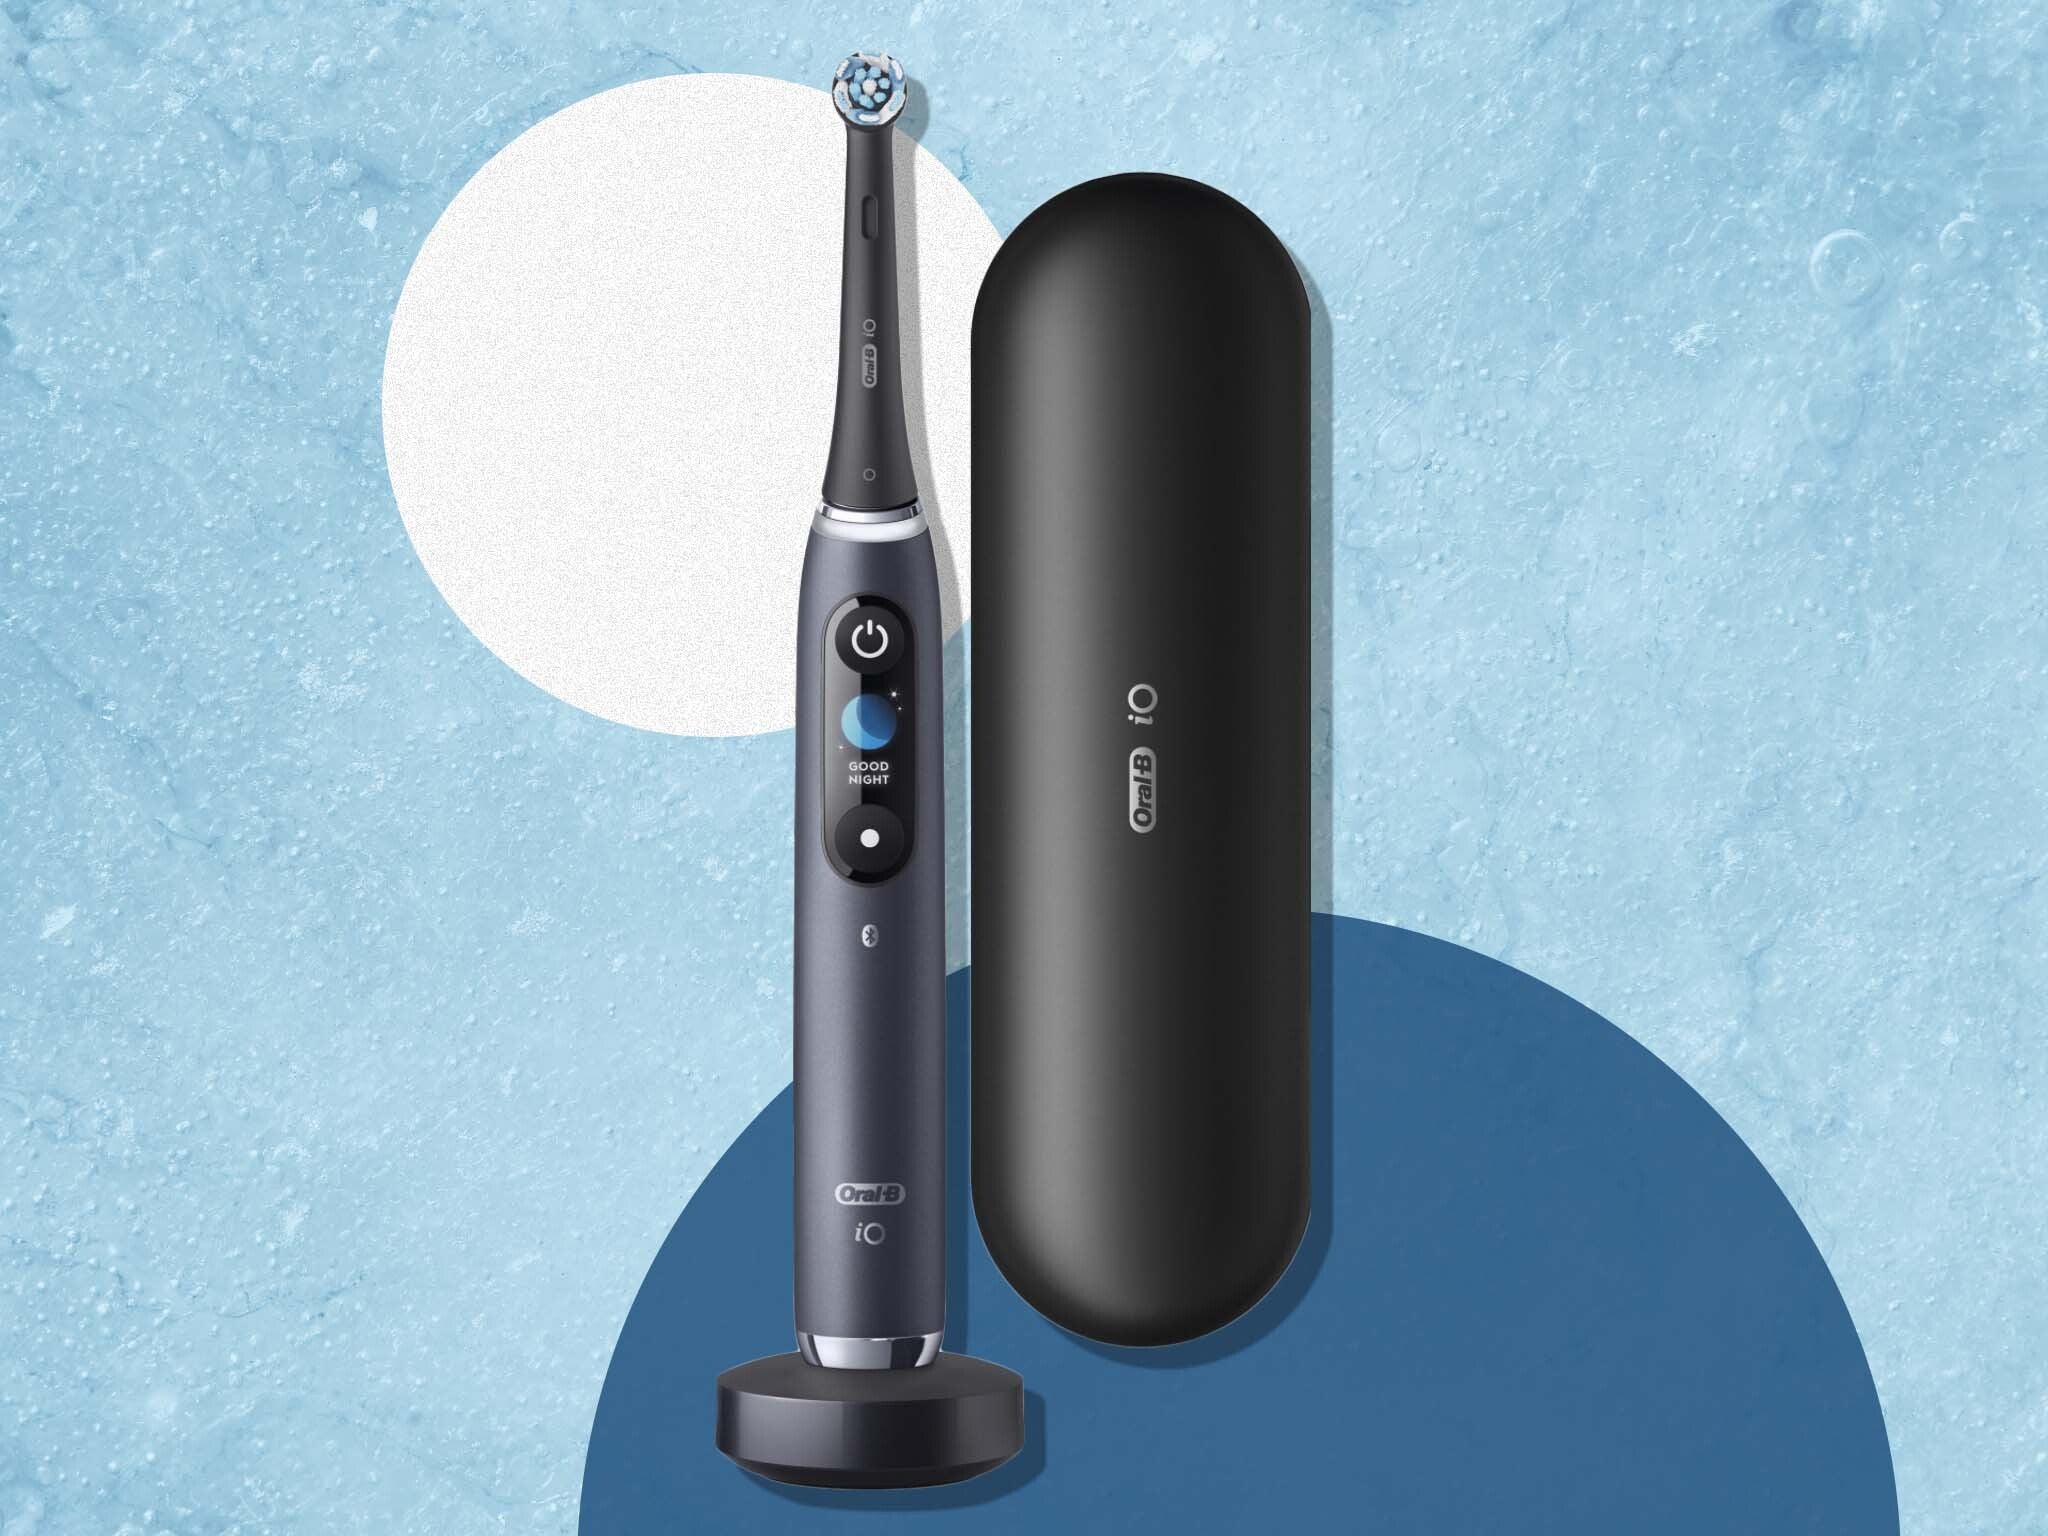 Oral-B iO 6 electric toothbrush review: An older model at a decent  price-point